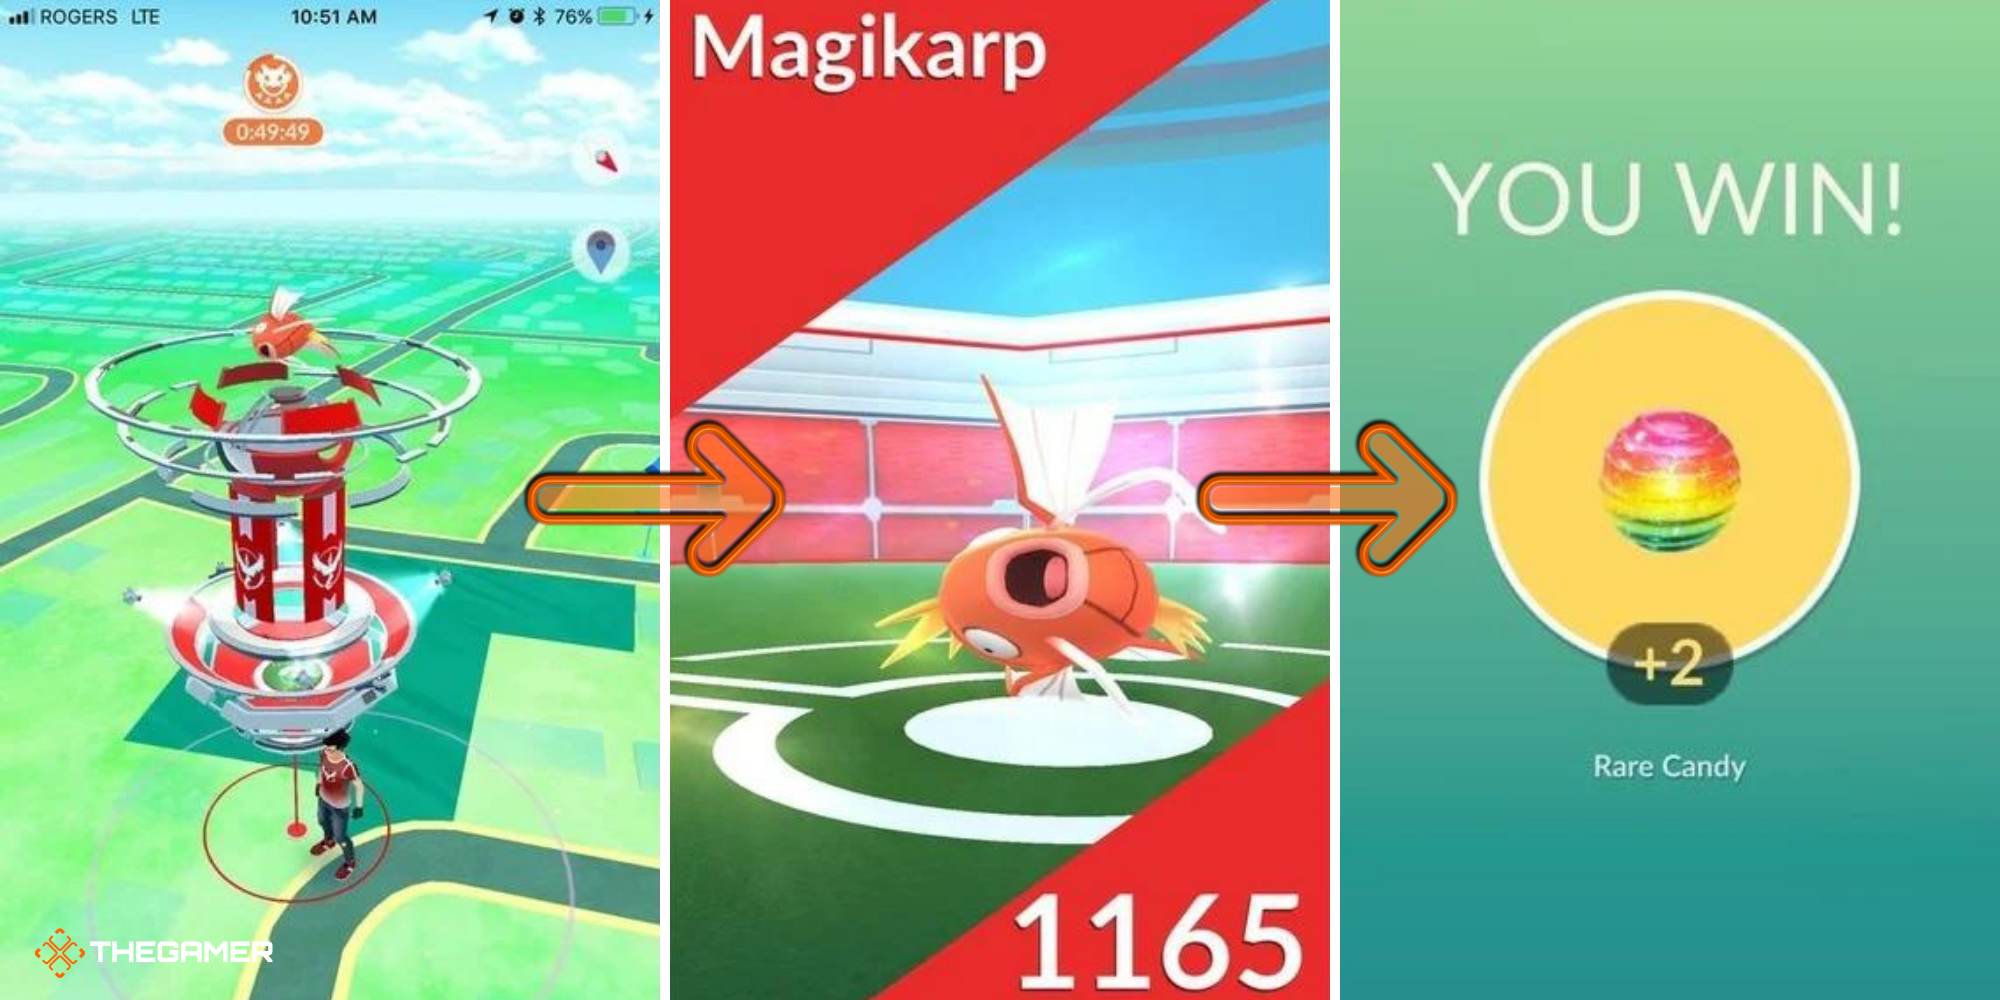 Pokemon Go Player joining a Magikarp raid and earning Rare Candy